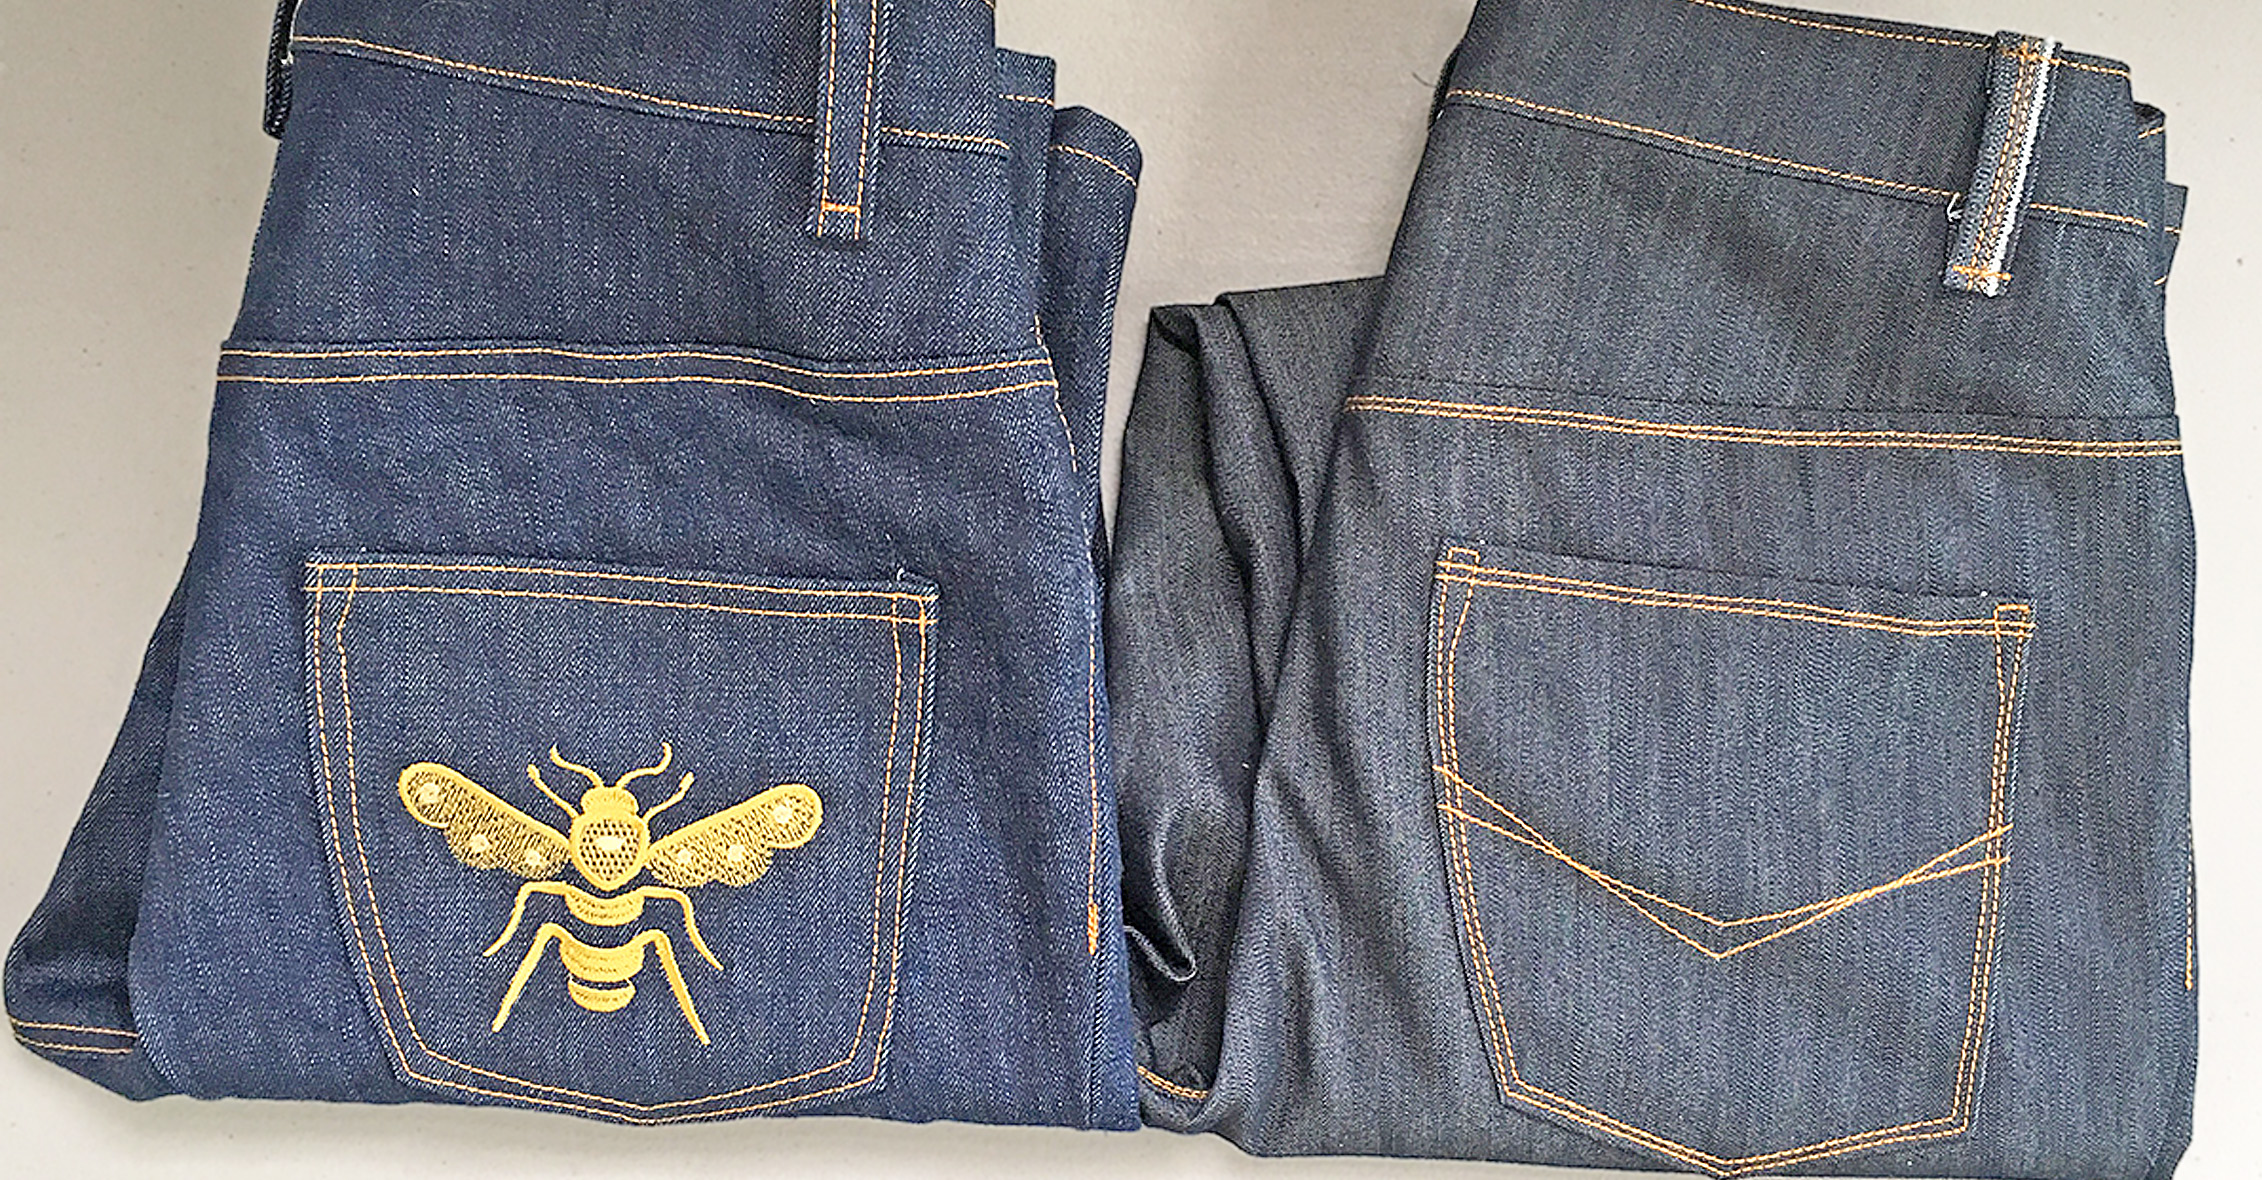 Jeans Tips patterns and denim fabric from WeAllSew